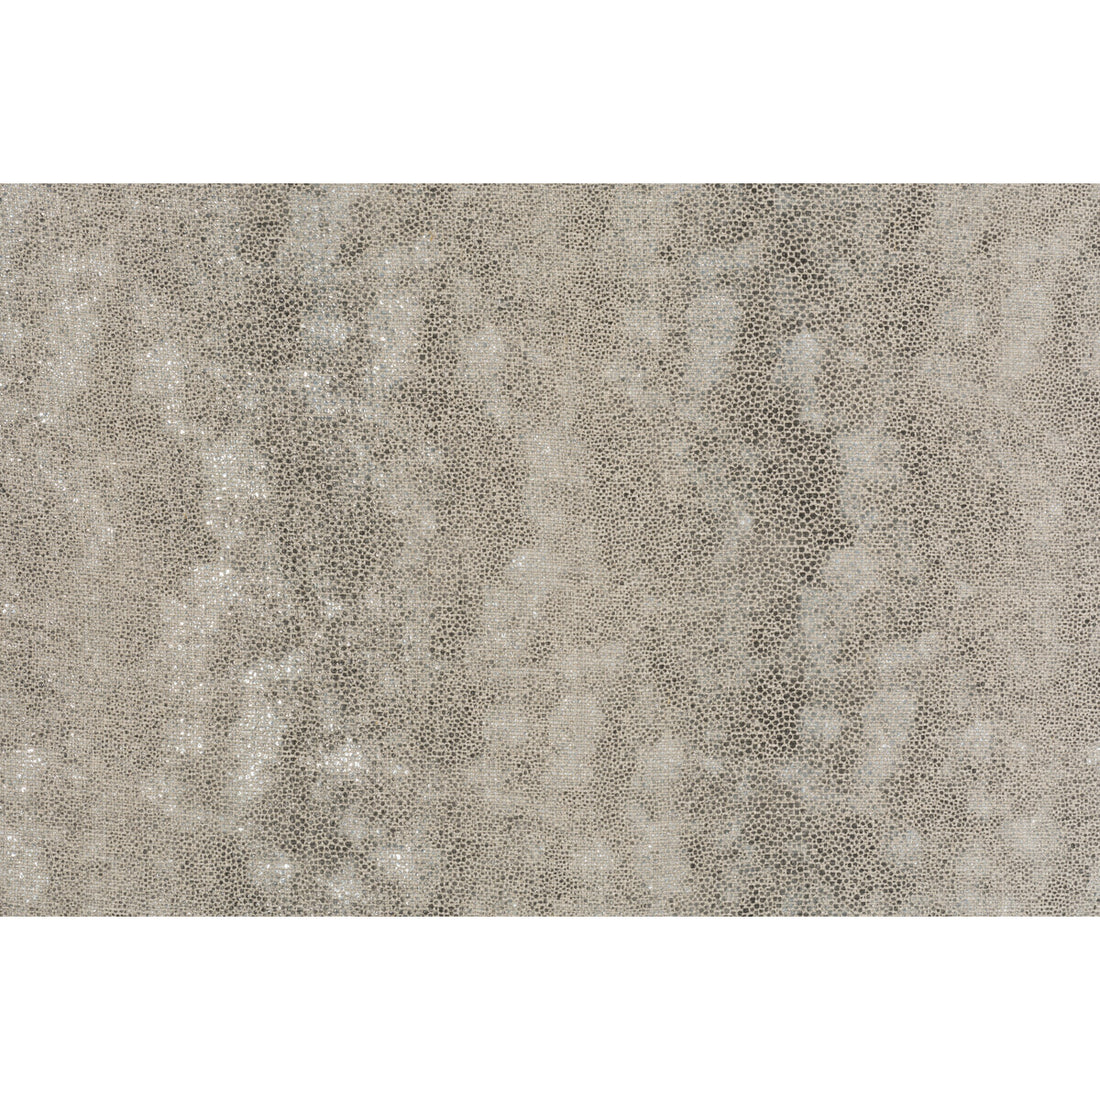 Pyrite fabric in silver color - pattern GWF-3404.11.0 - by Lee Jofa Modern in the Kelly Wearstler Leather collection